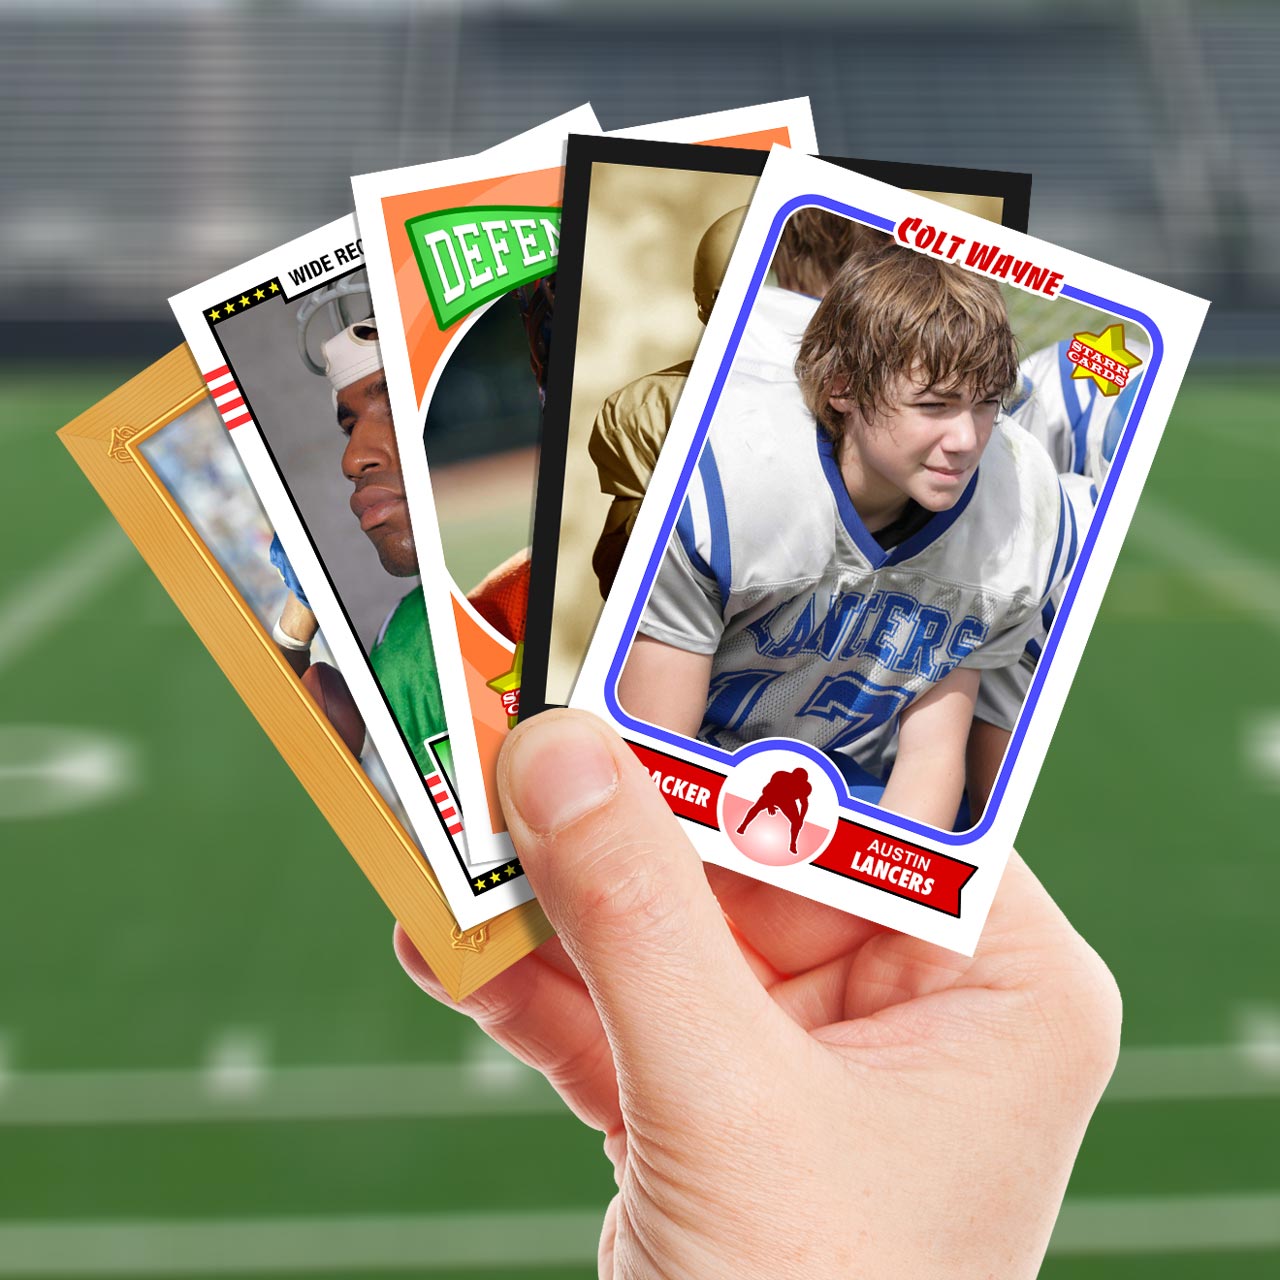 make-your-own-football-card-with-starr-cards